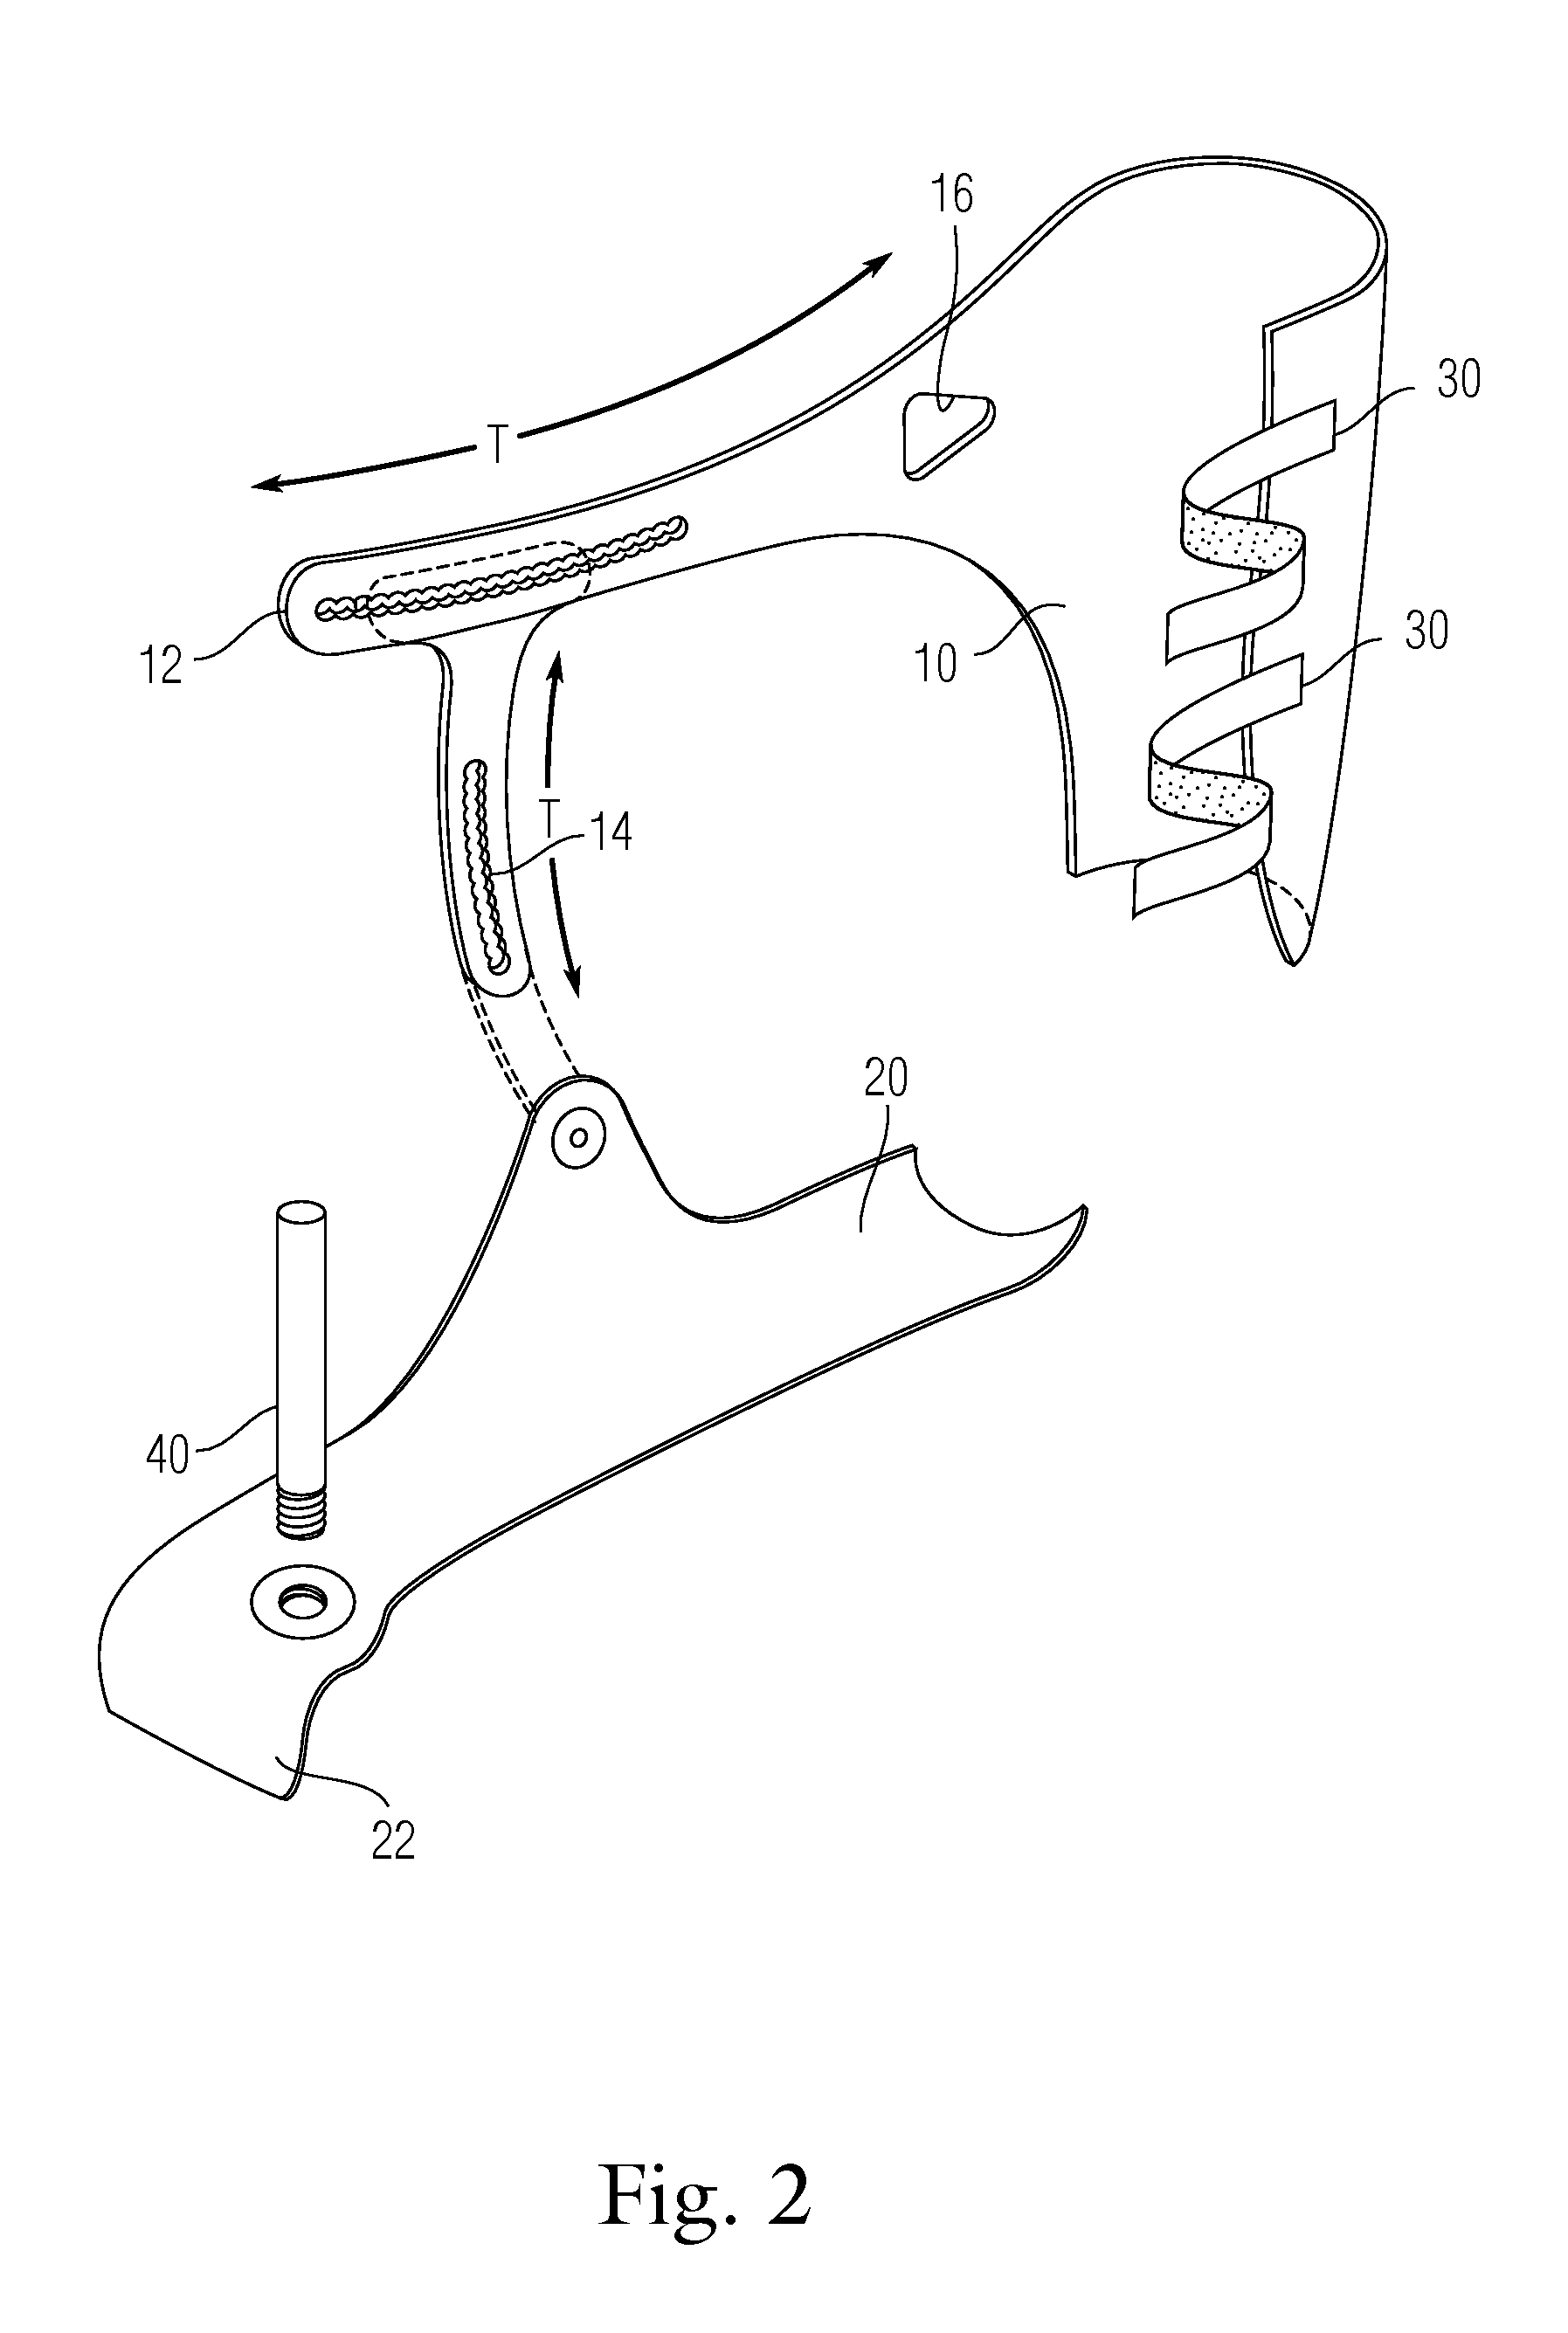 Extremity Support Apparatus and Method